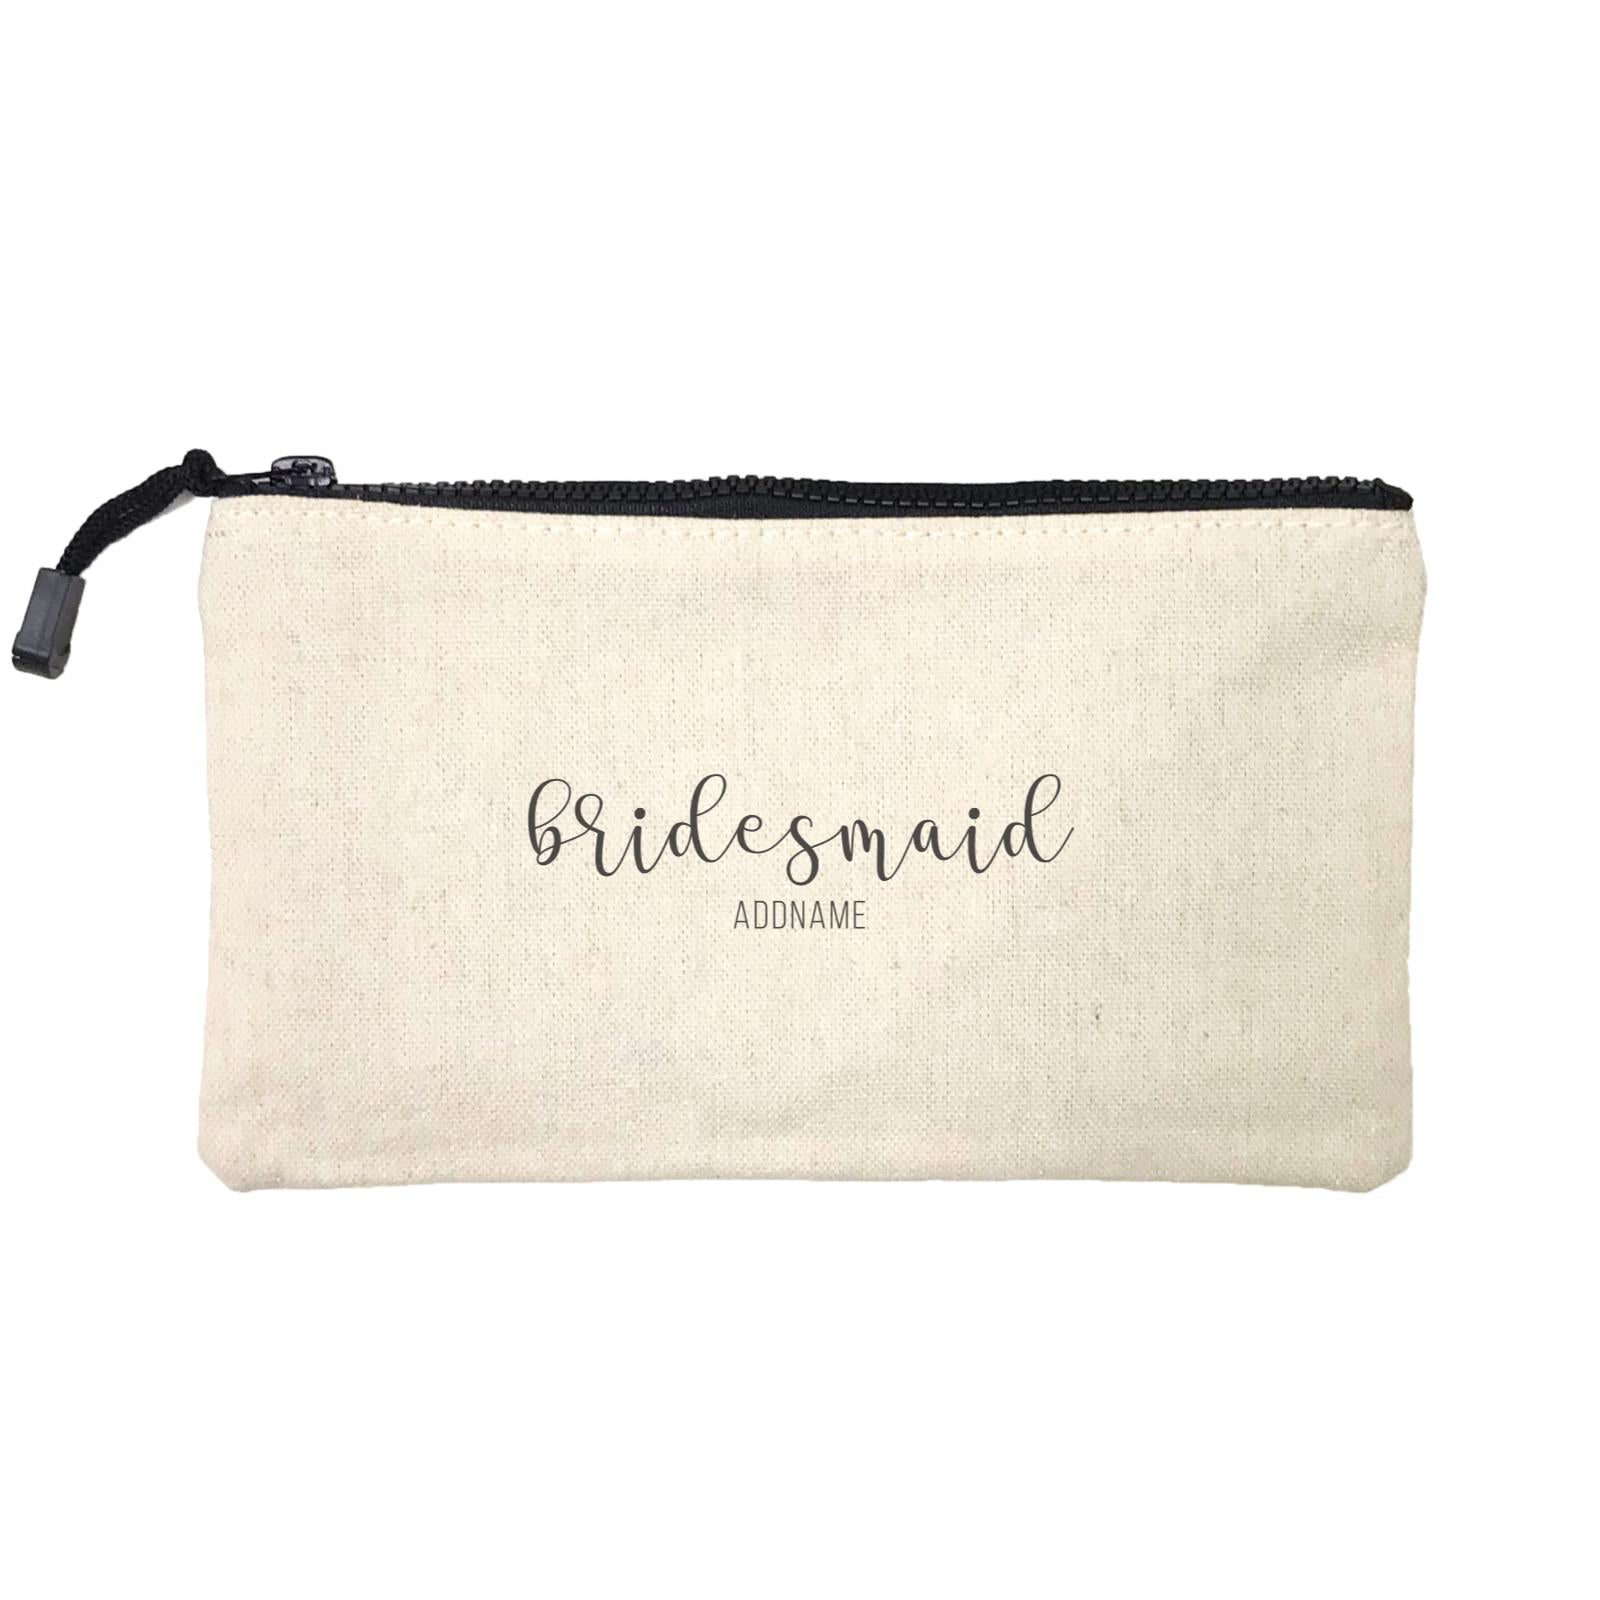 Bridesmaid Calligraphy Bridesmaid Subtle Addname Mini Accessories Stationery Pouch